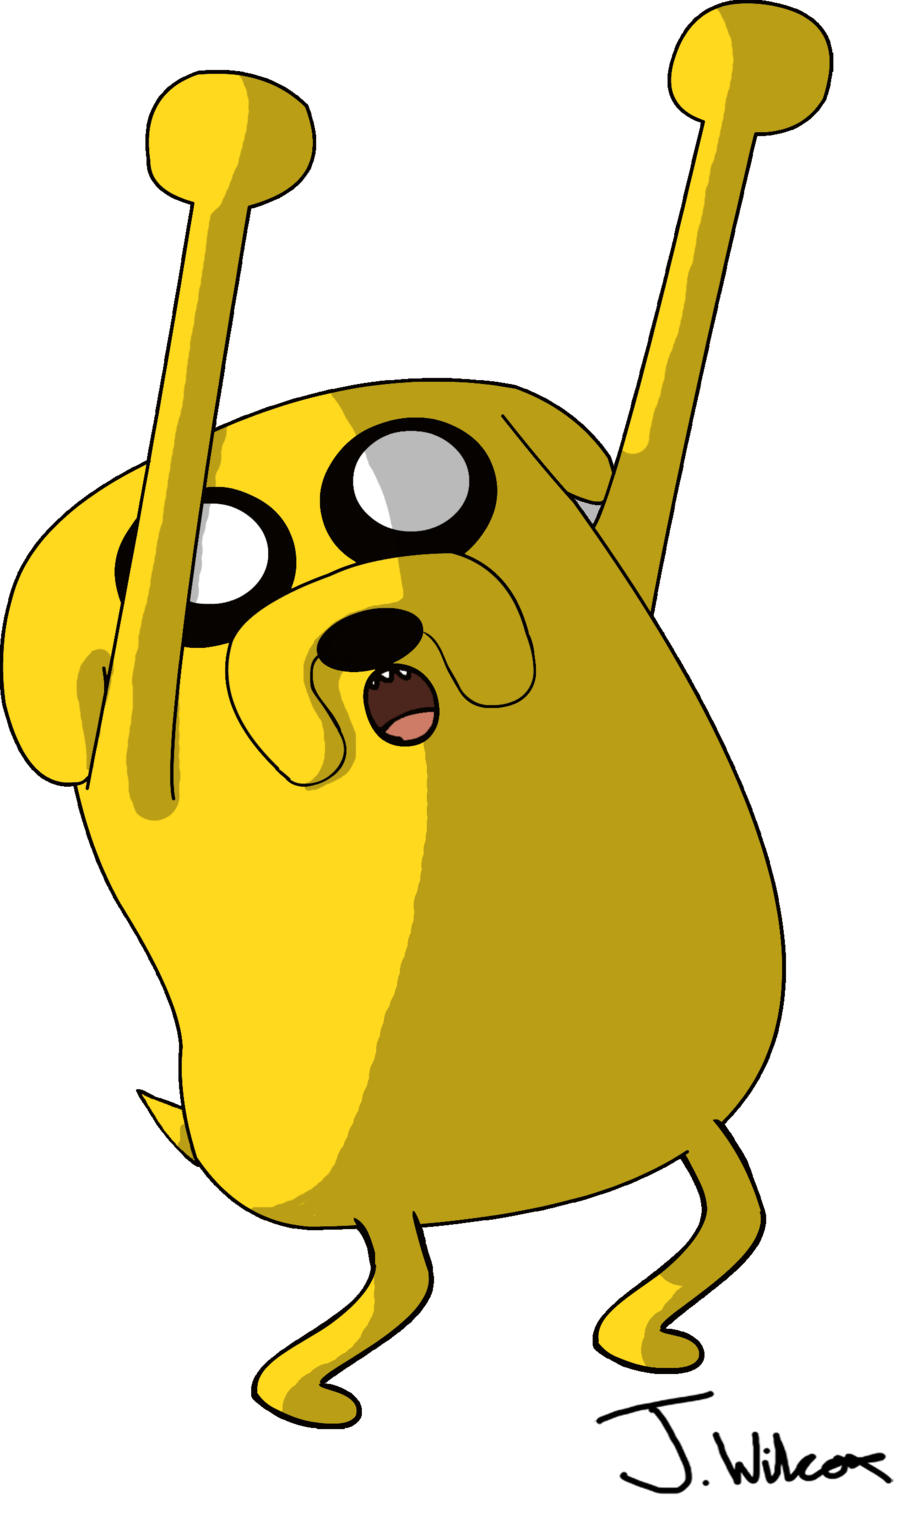 Adventure time Jake the dog